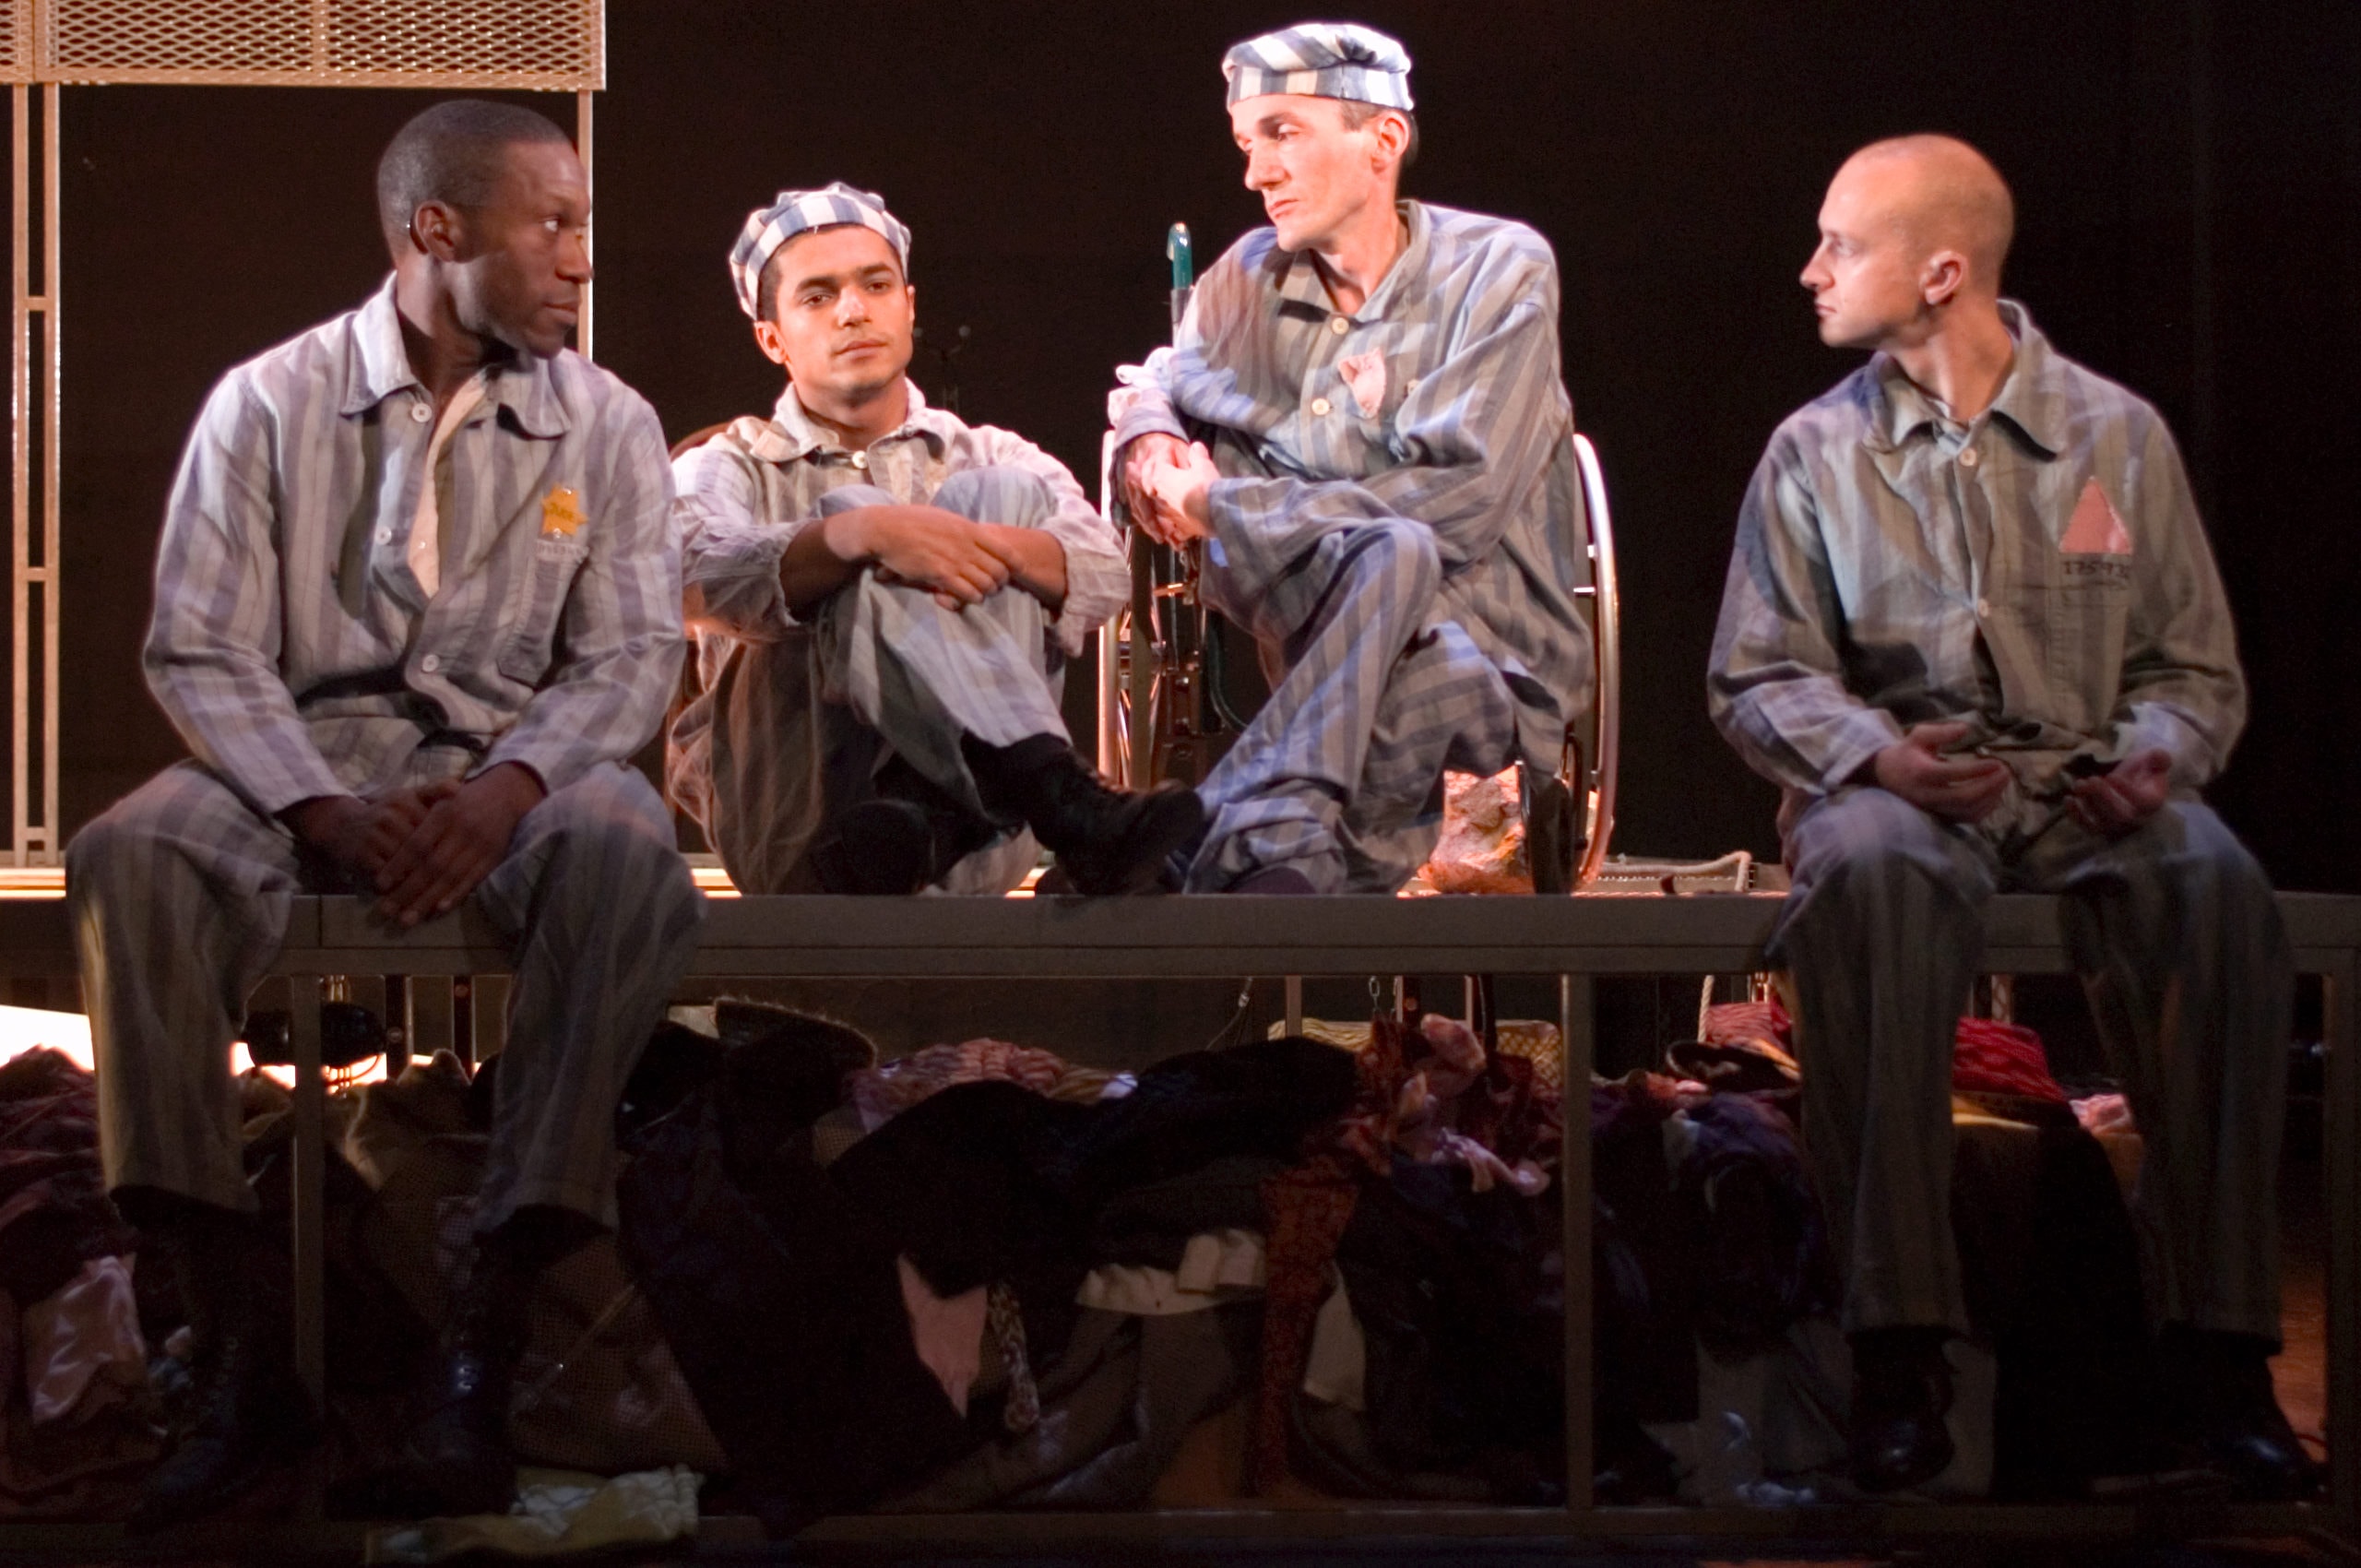 four performers sit on stage, they are all in the uniforms of people in concentration camps. They look despairingly at each other